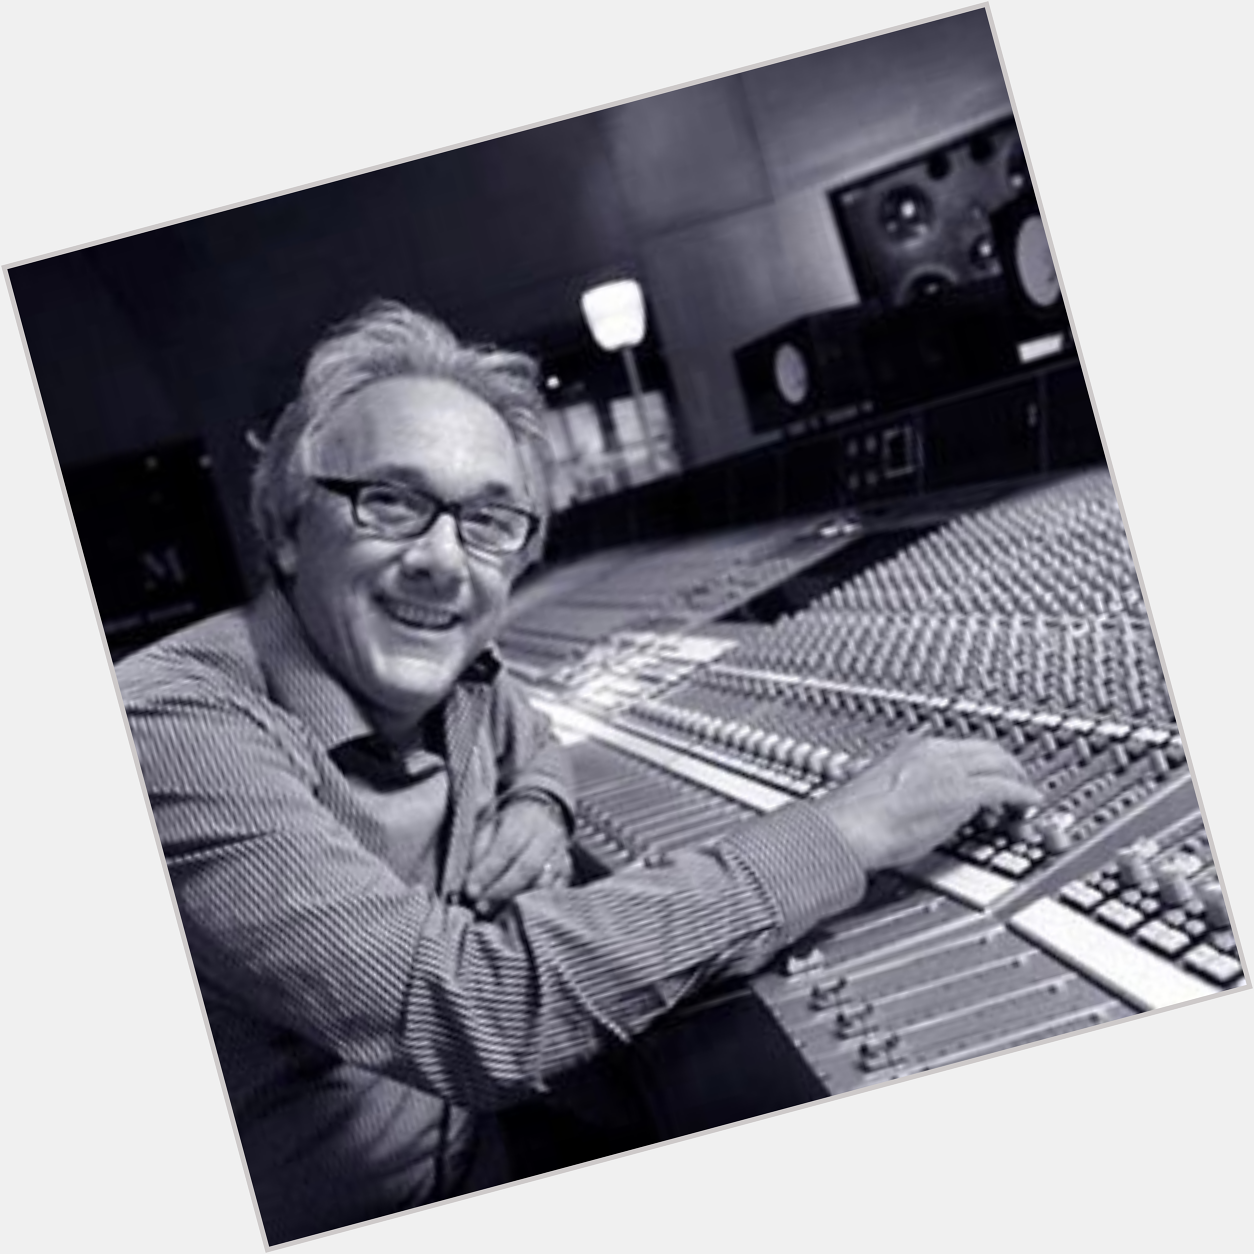 Reposting ...
\"Please join us in wishing a very happy birthday to Trevor Horn!\" 